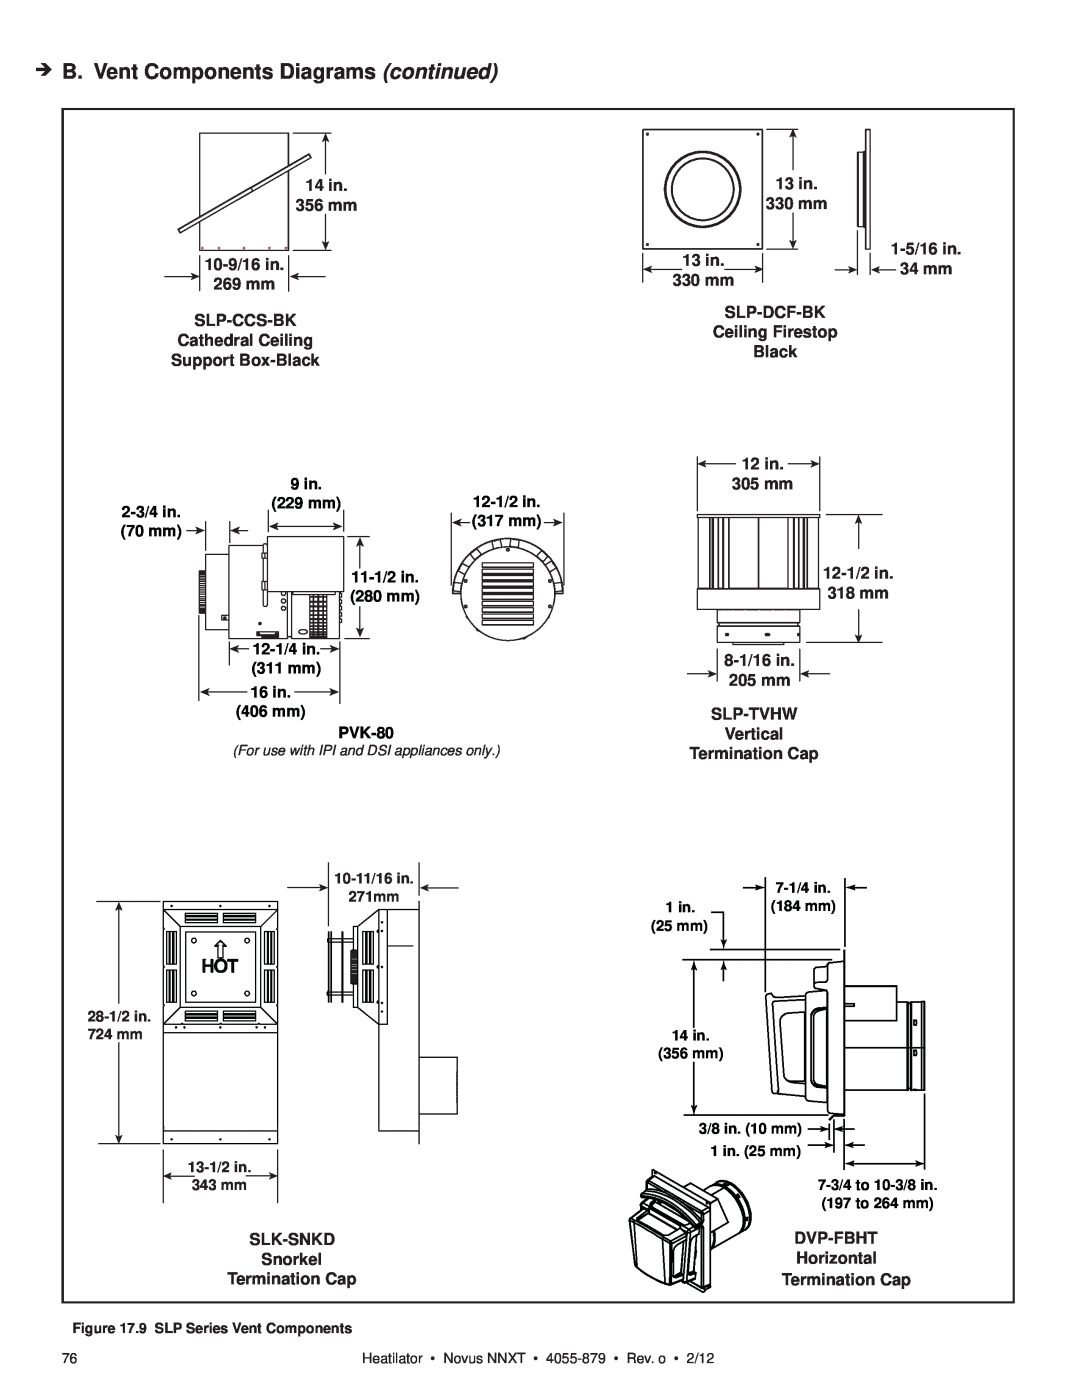 Heatiator NNXT4236IL NNXT3933I  B. Vent Components Diagrams continued, 9 in, 12-1/2 in, 2-3/4 in, 229 mm, 317 mm, 70 mm 